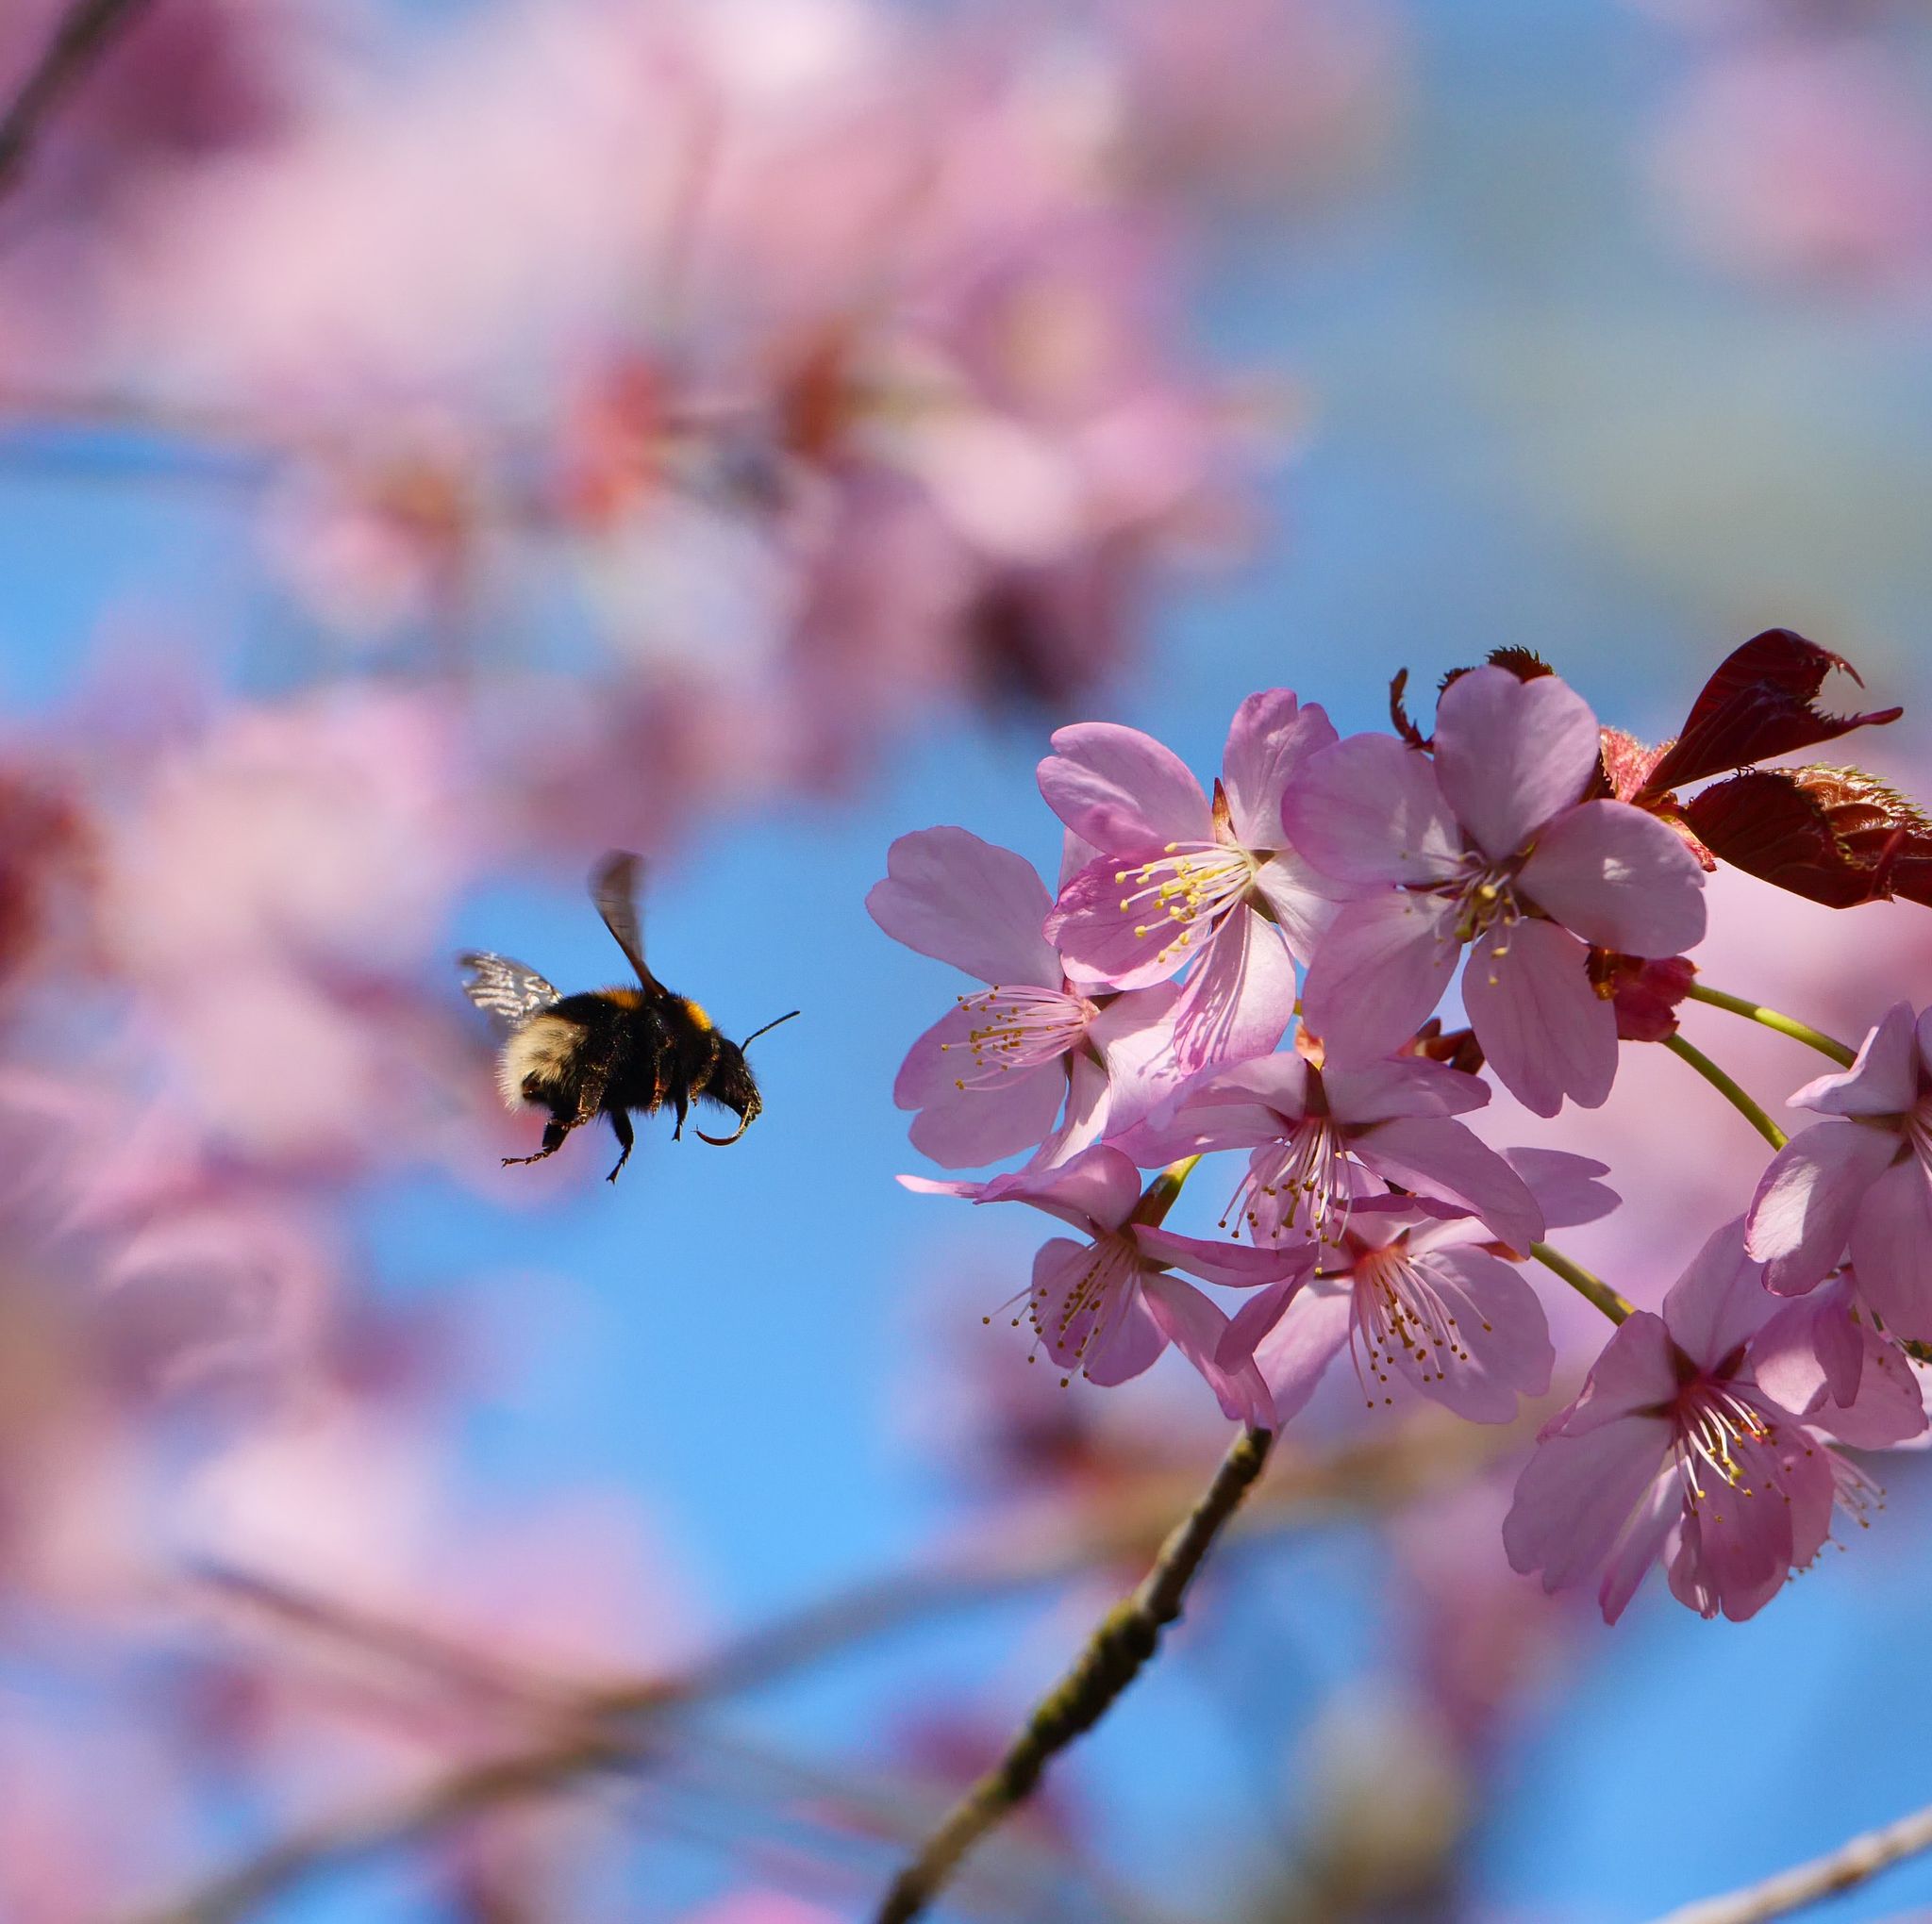 national trust launches blossomwatch to emulate japan’s hanami